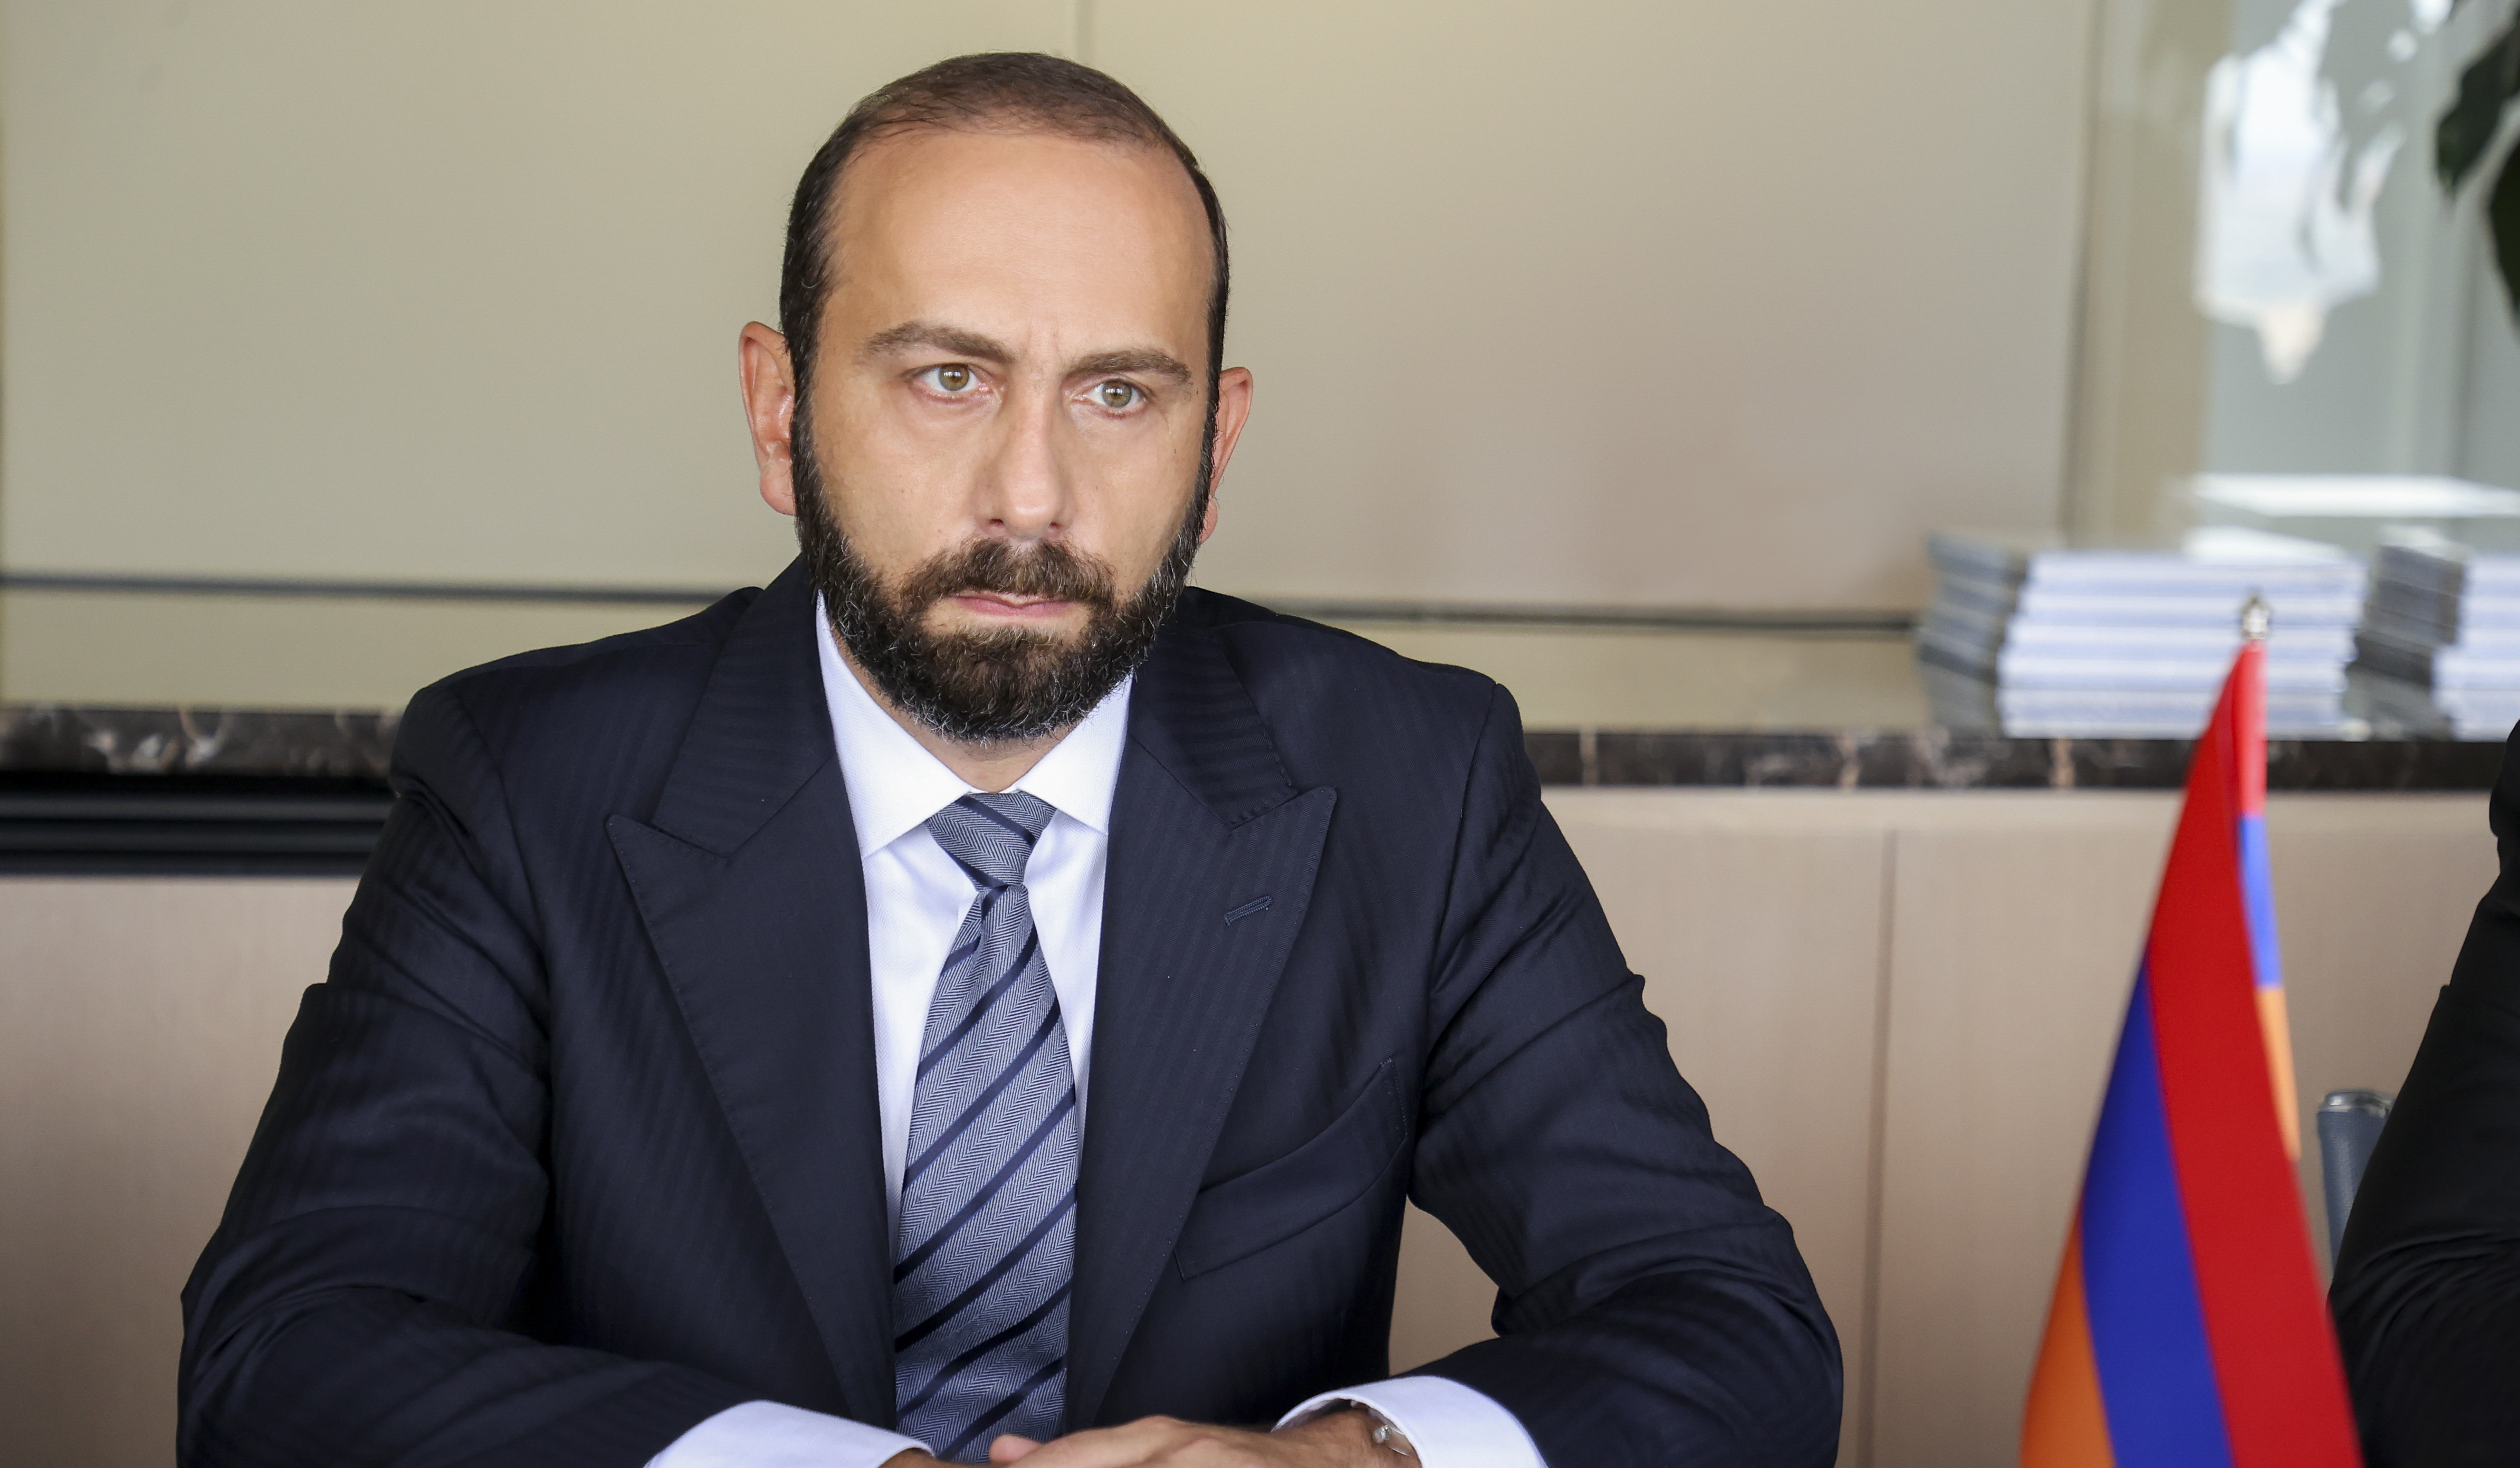 Sharing the sorrow, we wish strength in this dark time: Ararat Mirzoyan sent condolence message to his Iranian colleagues